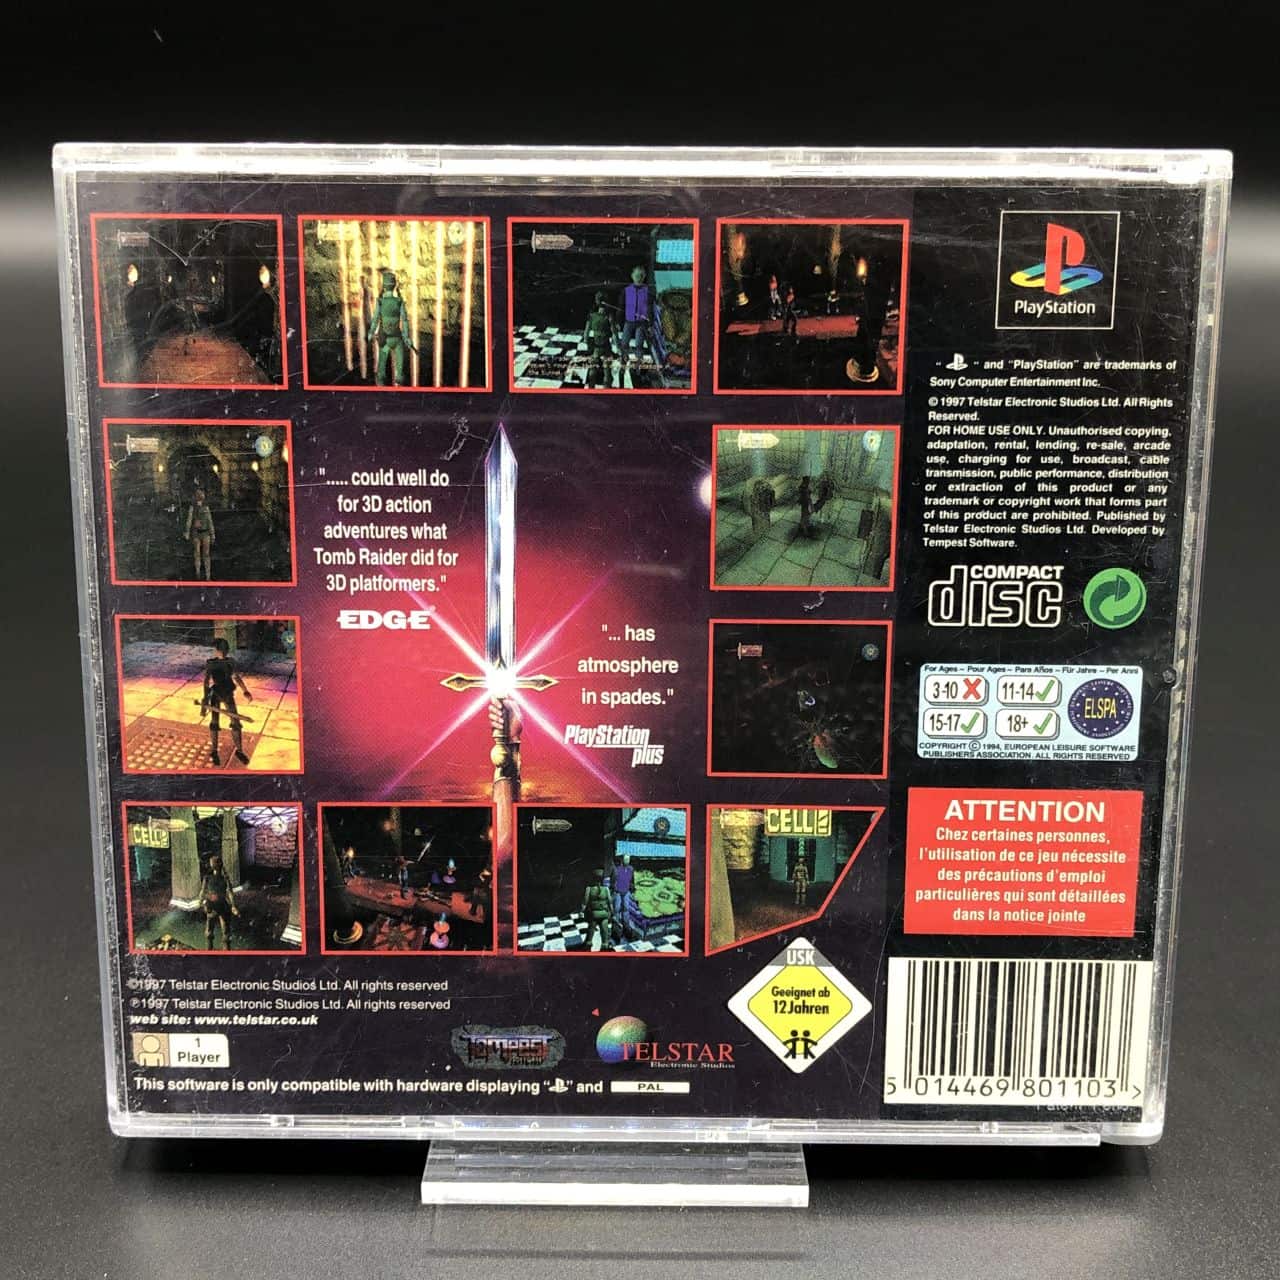 PS1 Excalibur 2555 AD (ohne Anleitung) (Sehr gut) Sony PlayStation 1